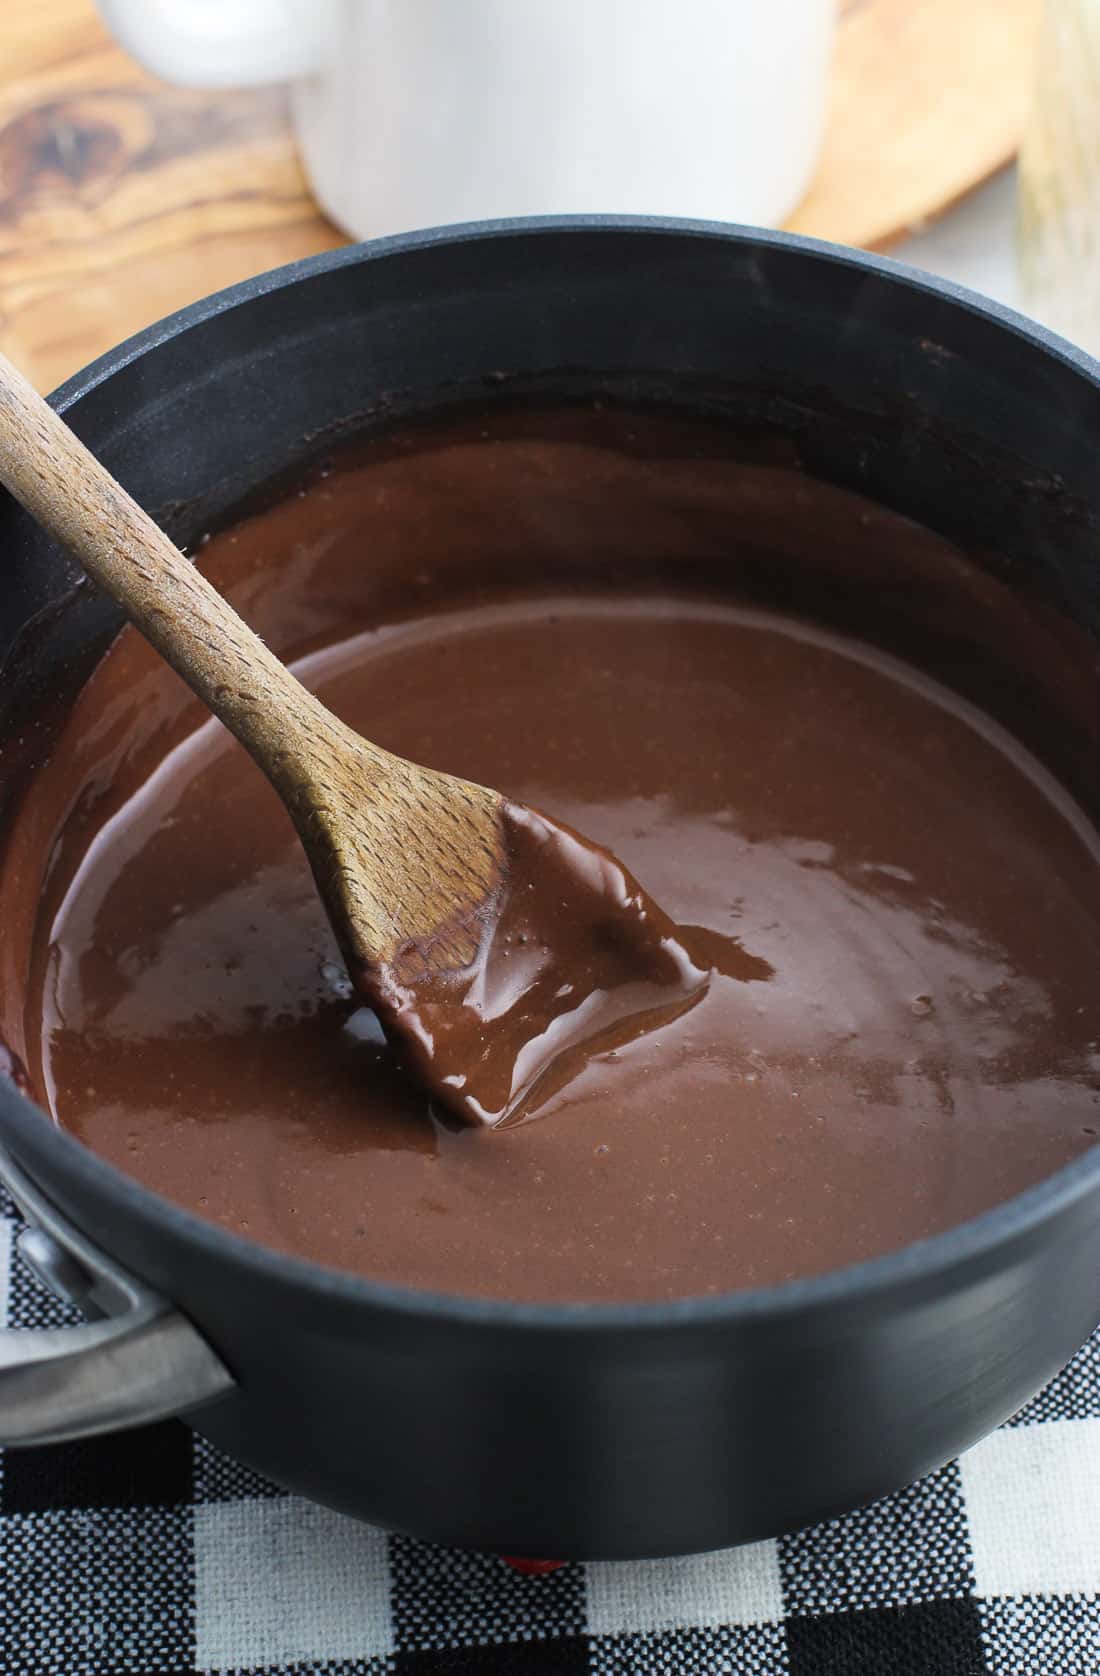 The mocha hot chocolate mixture in a sauce pan with a thickly-coated wooden spoon in it.